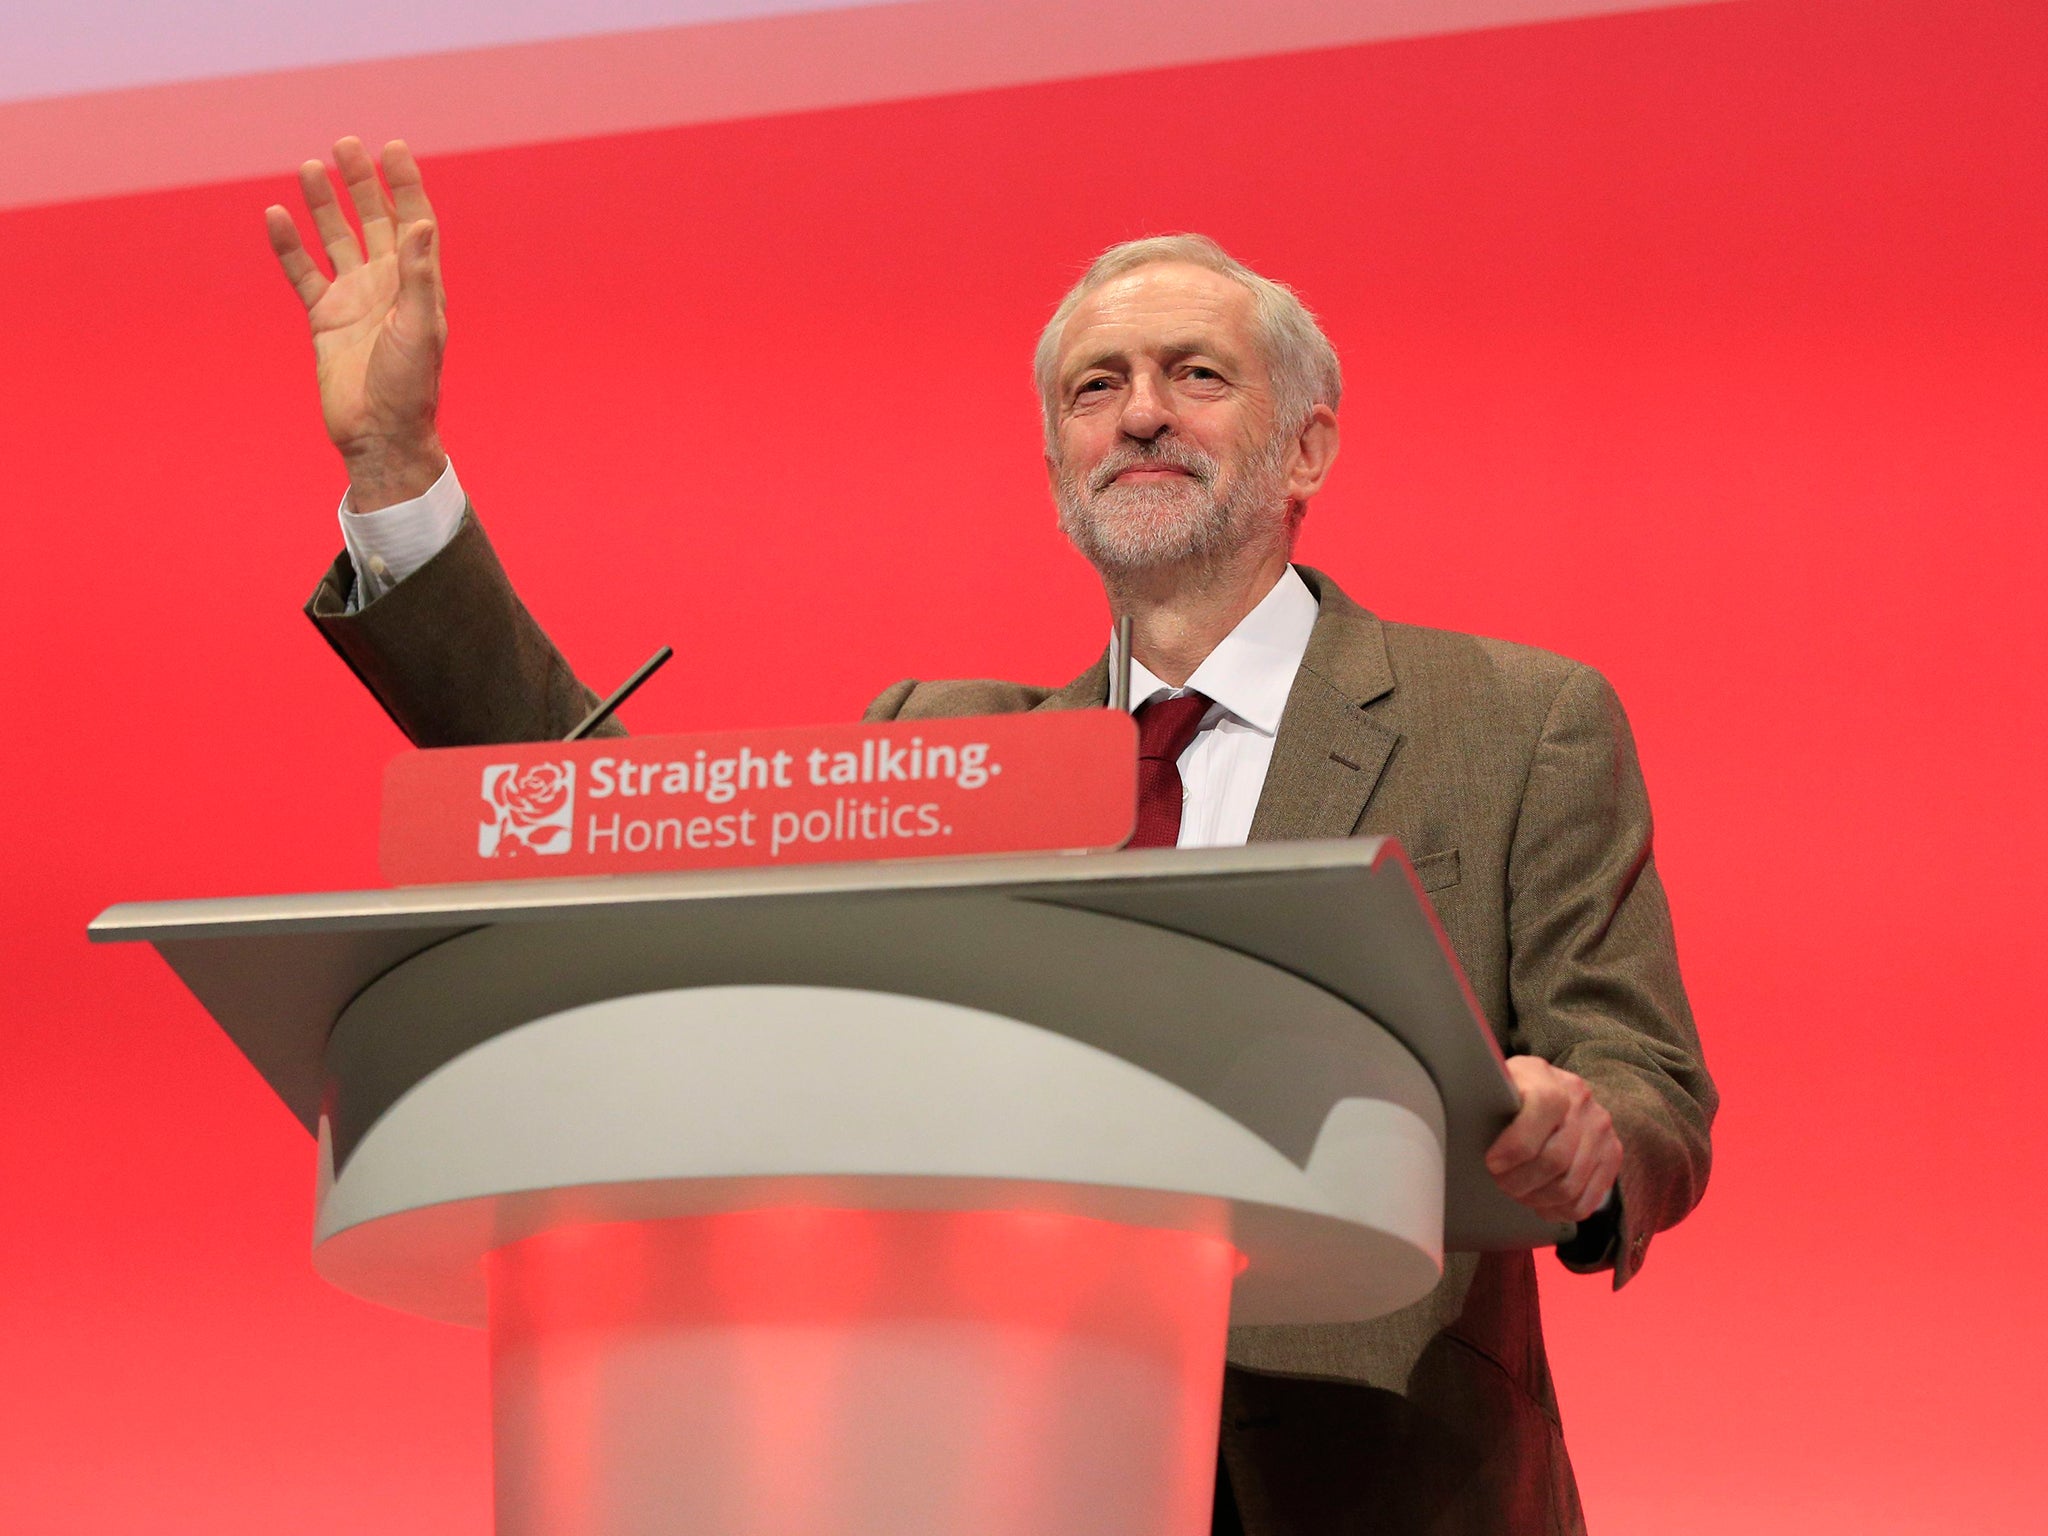 Labour Party leader Jeremy Corbyn making his keynote speech during the third day of the Labour Party conference at the Brighton Centre in Brighton